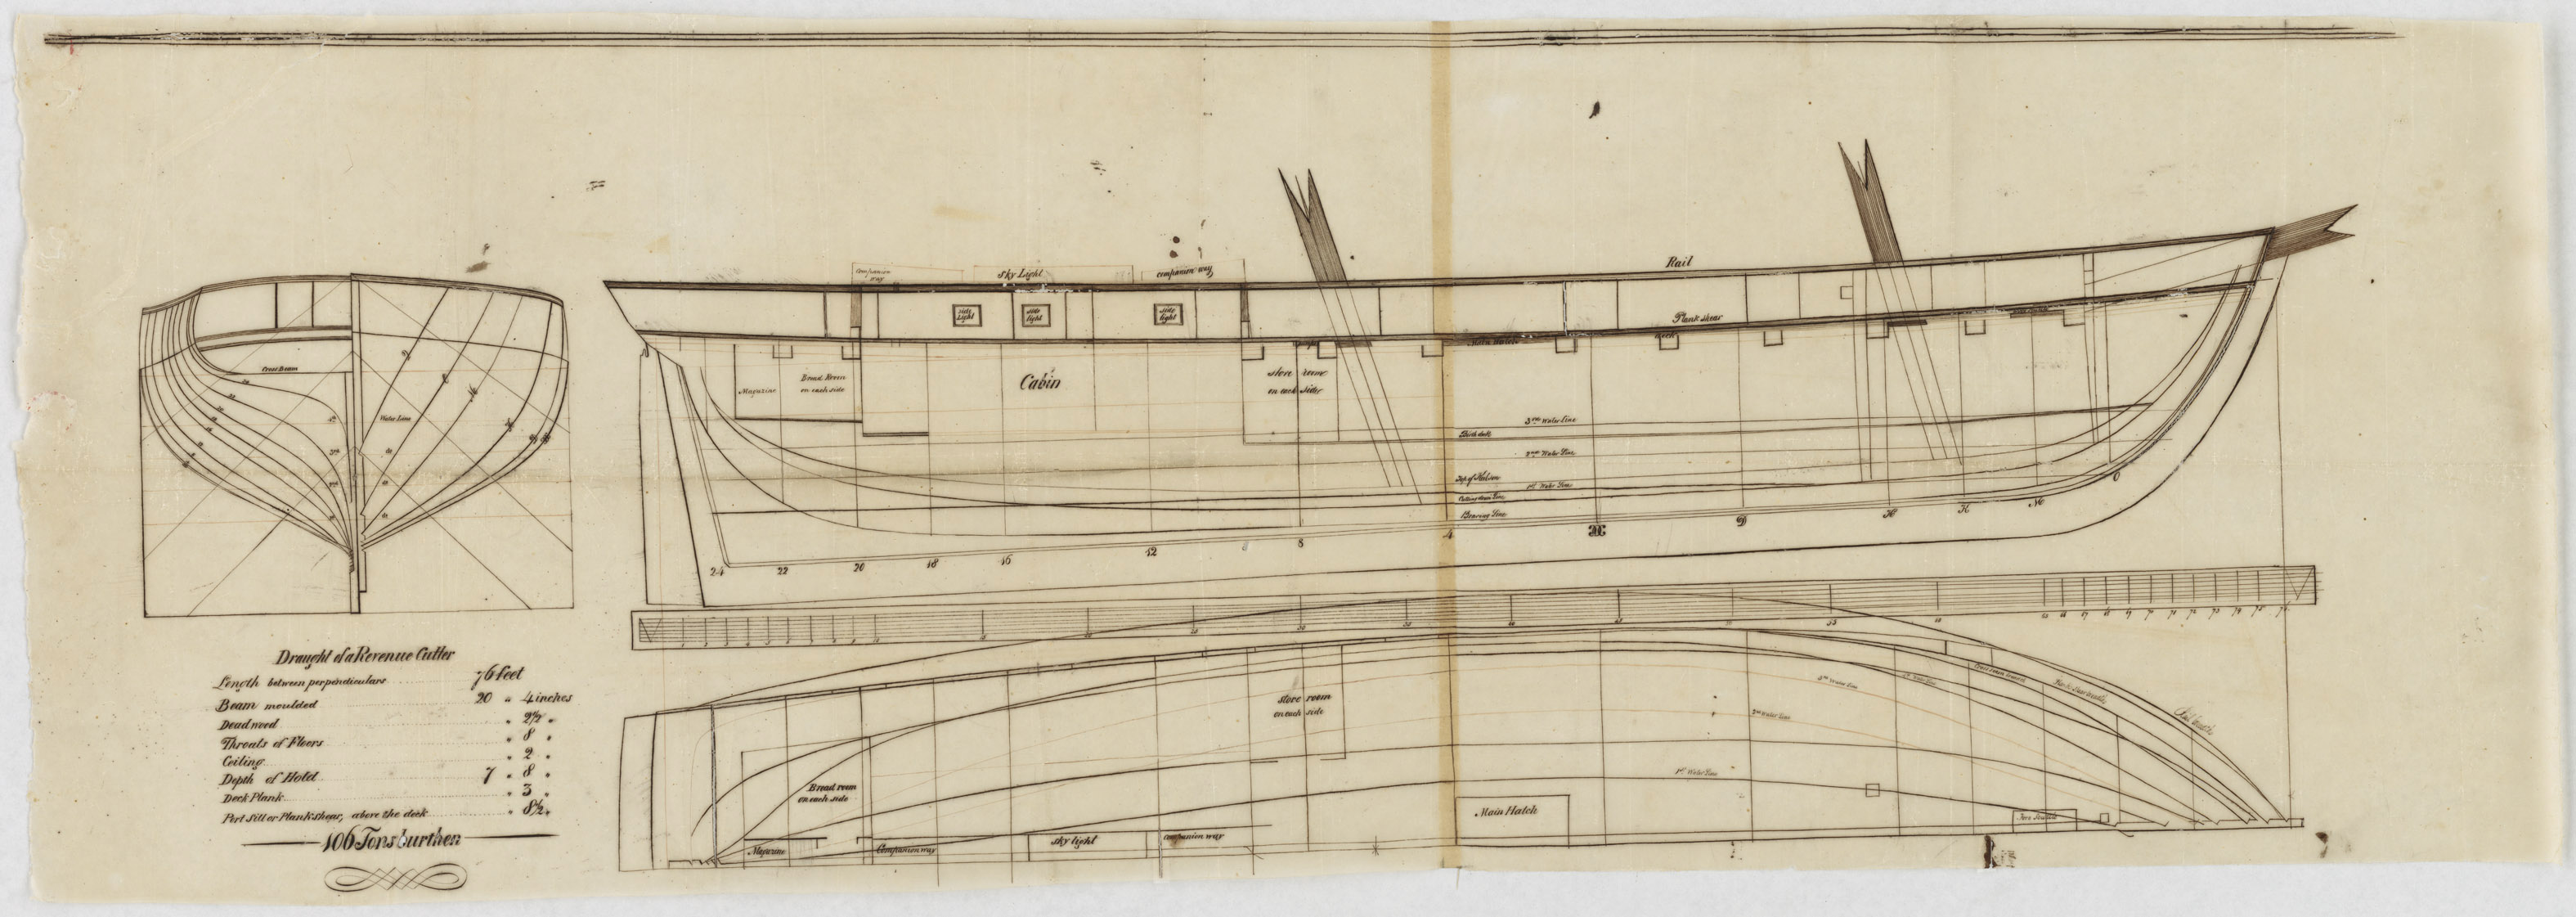 A rare line drawing of Revenue Cutter Hamilton lost in 1853 near Charleston. (National Archives-Waltham)